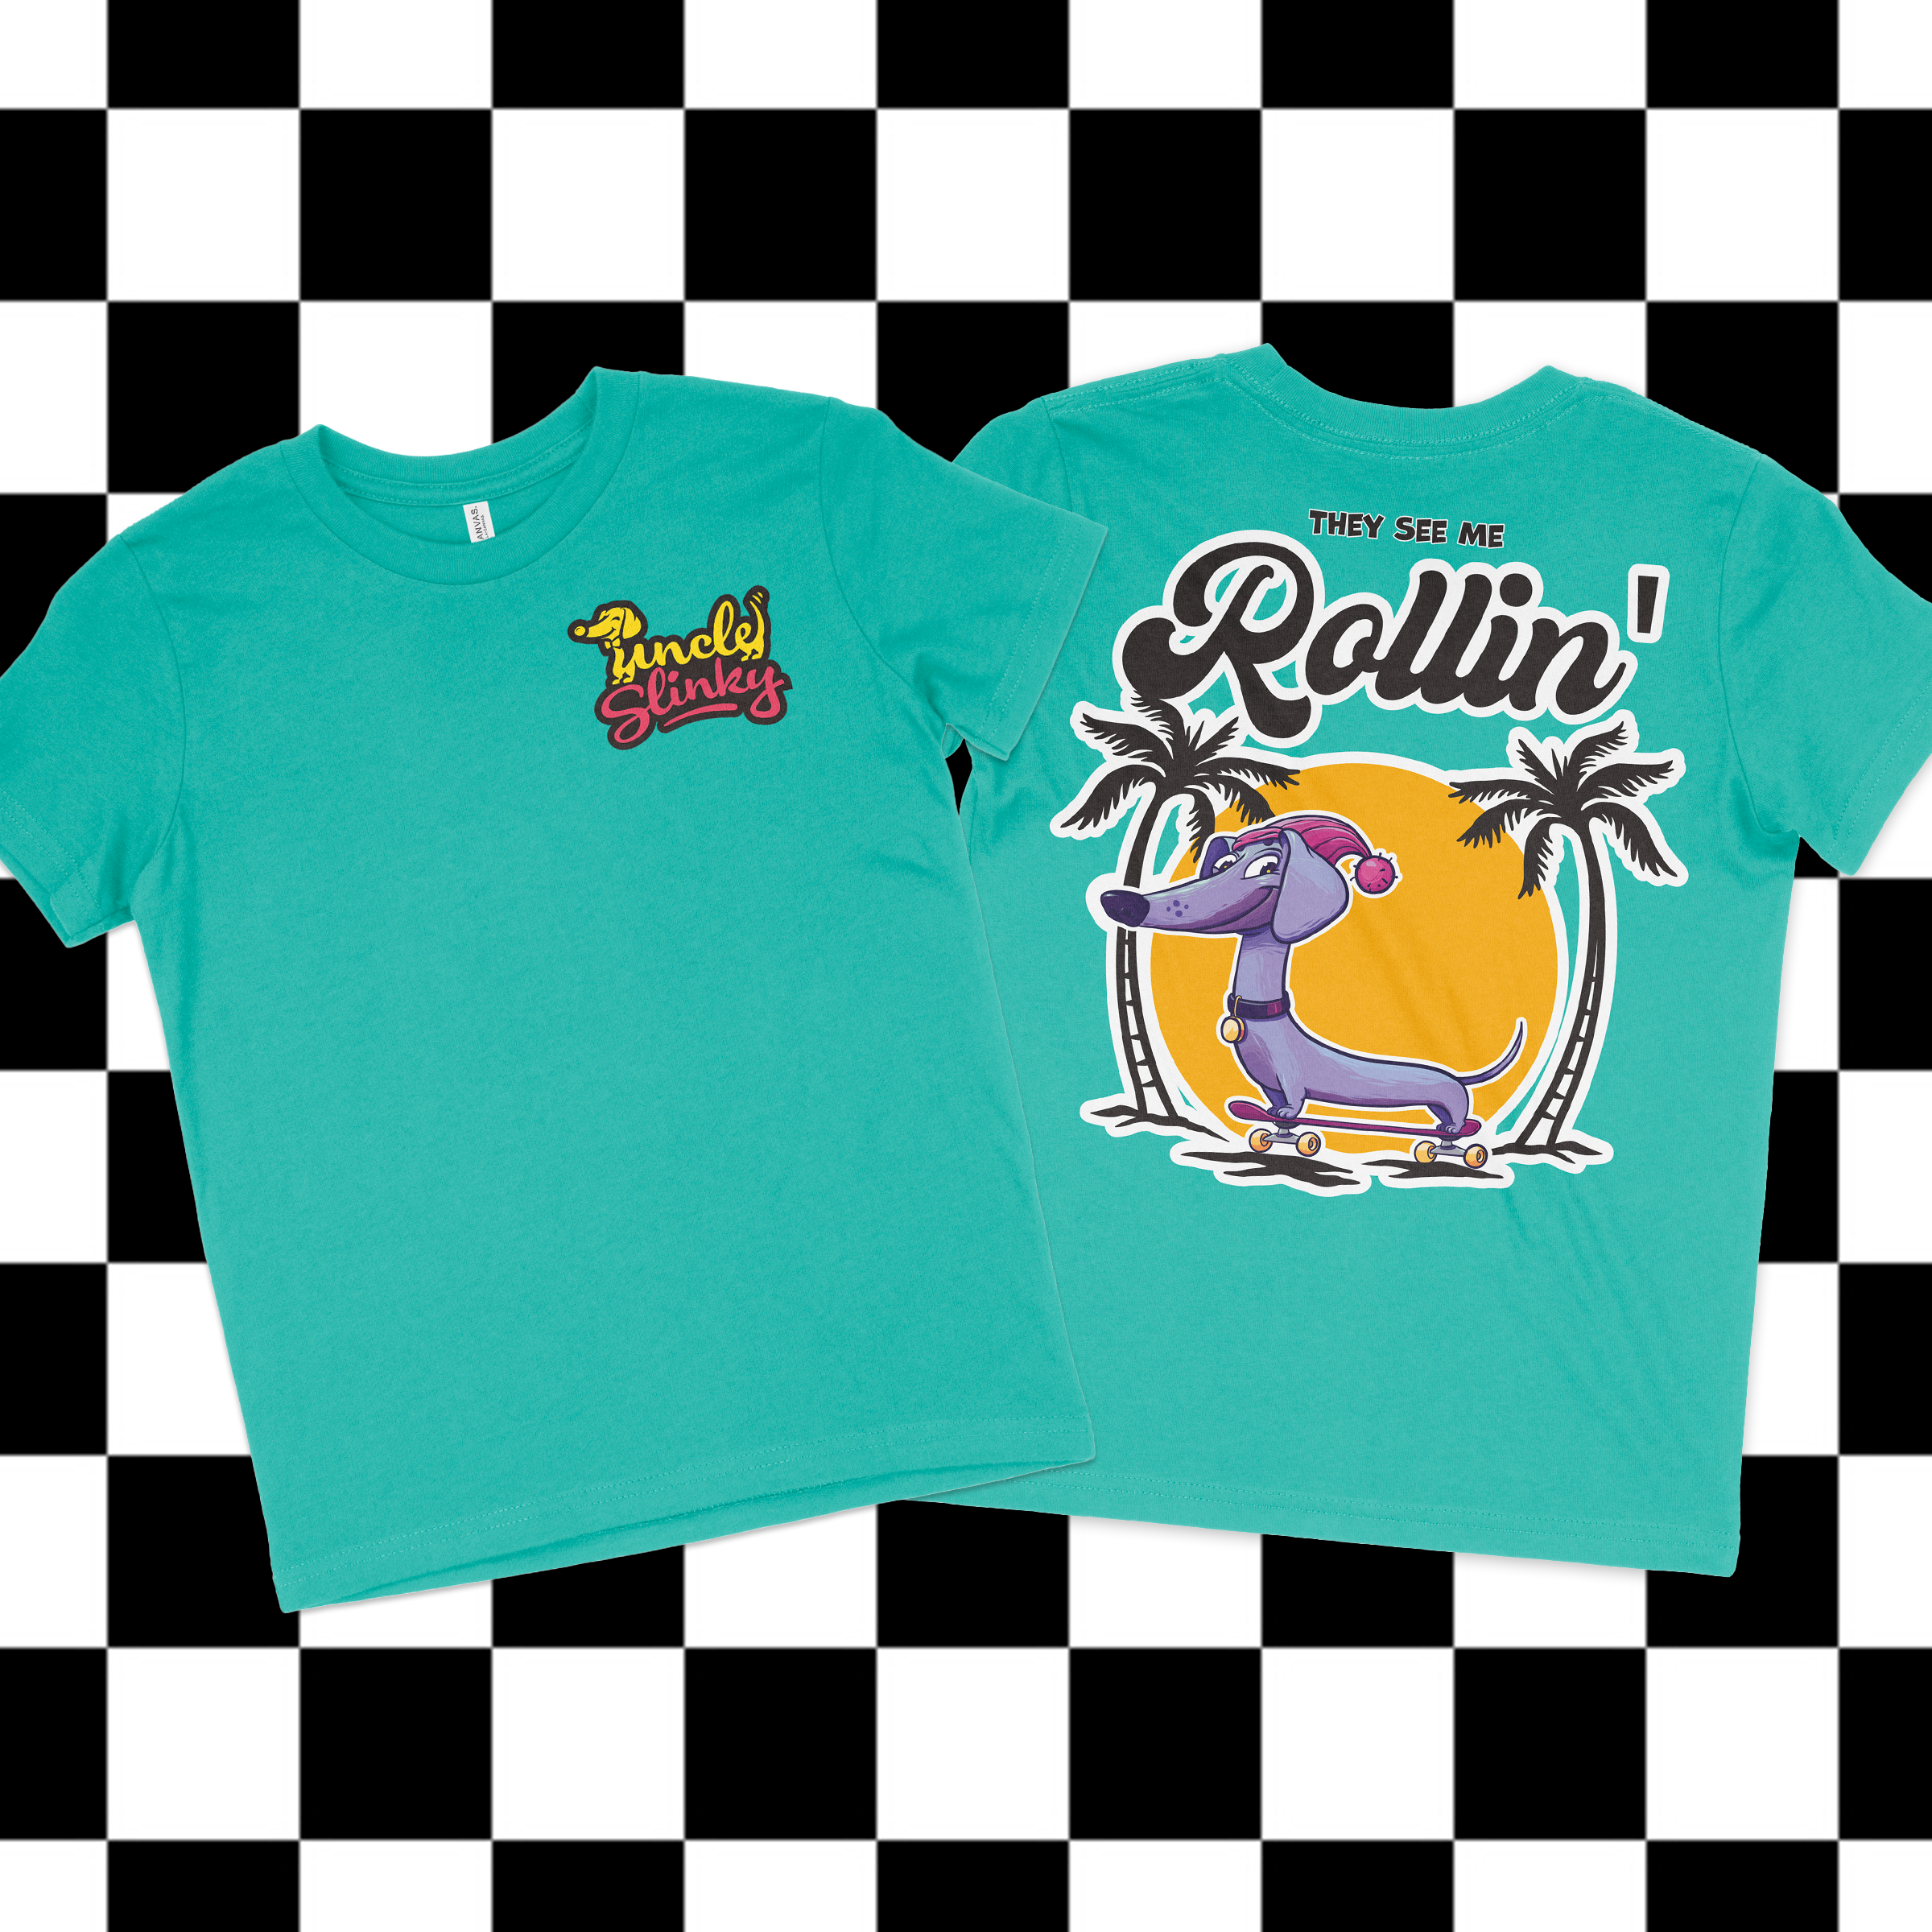 turquoise t shirt with dachshund cartoon